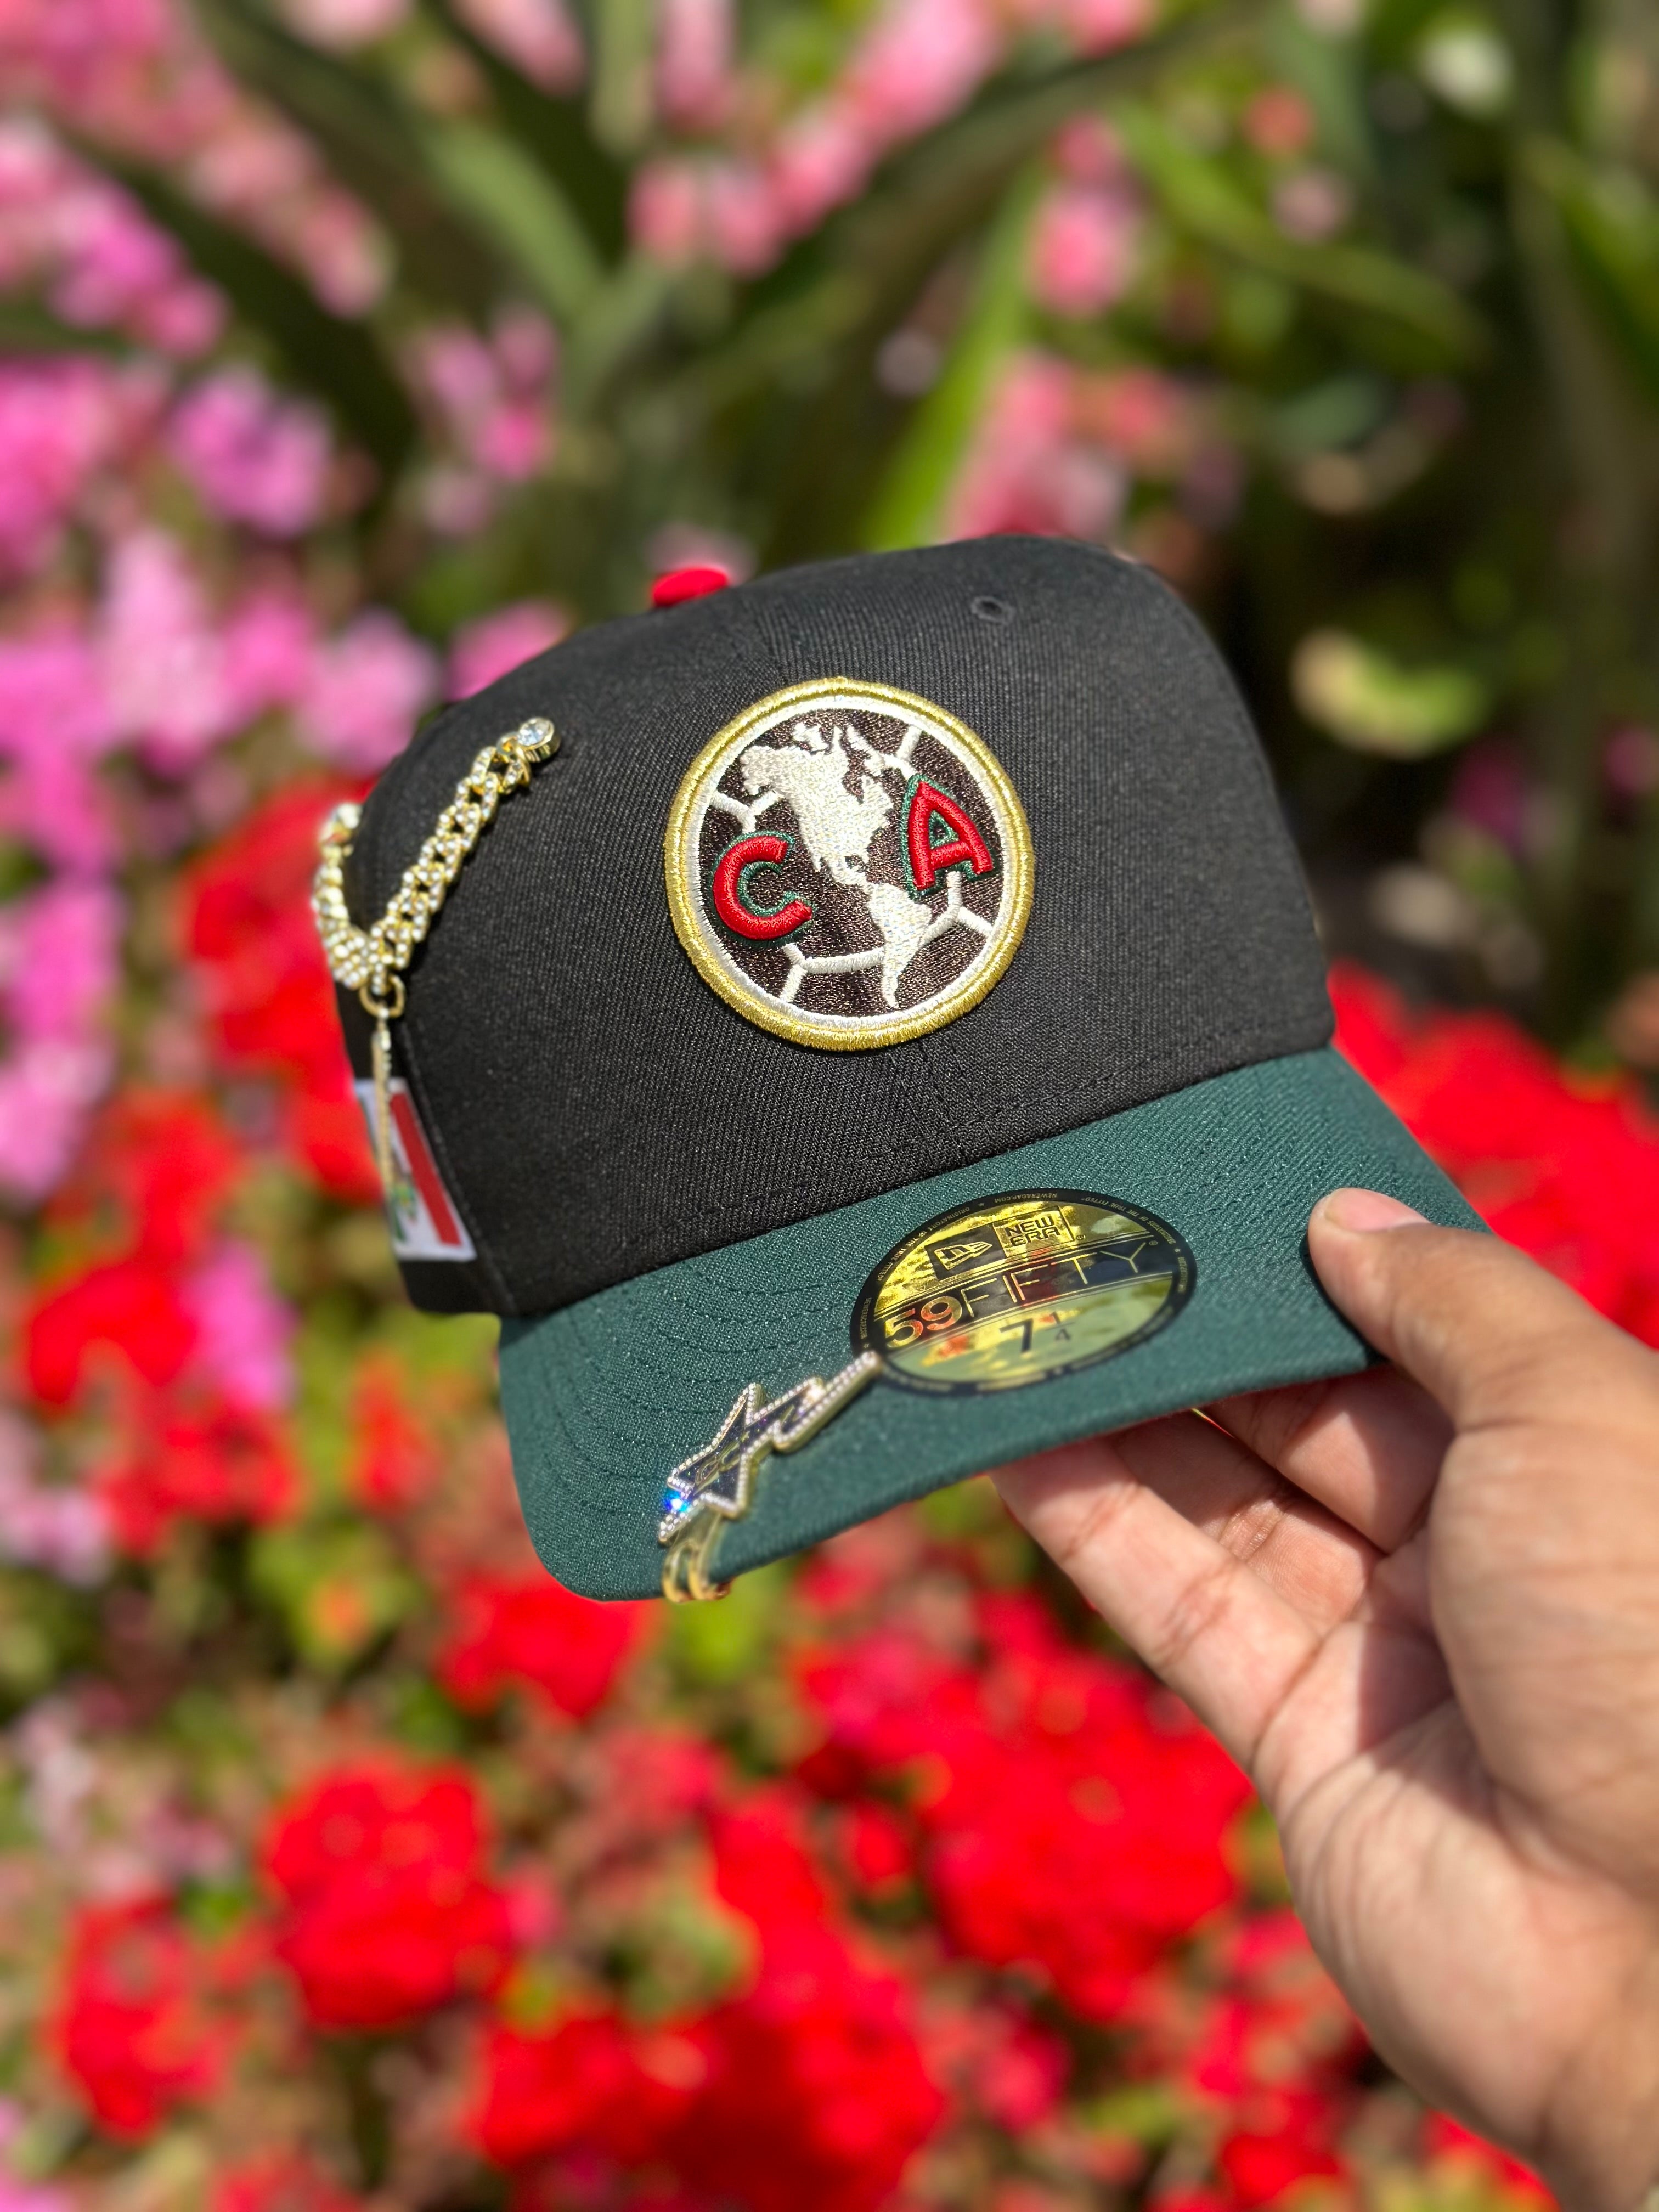 NEW ERA EXCLUSIVE 59FIFTY BLACK/FOREST GREEN "CLUB AMERICA" W/ MEXICO FLAG SIDE PATCH